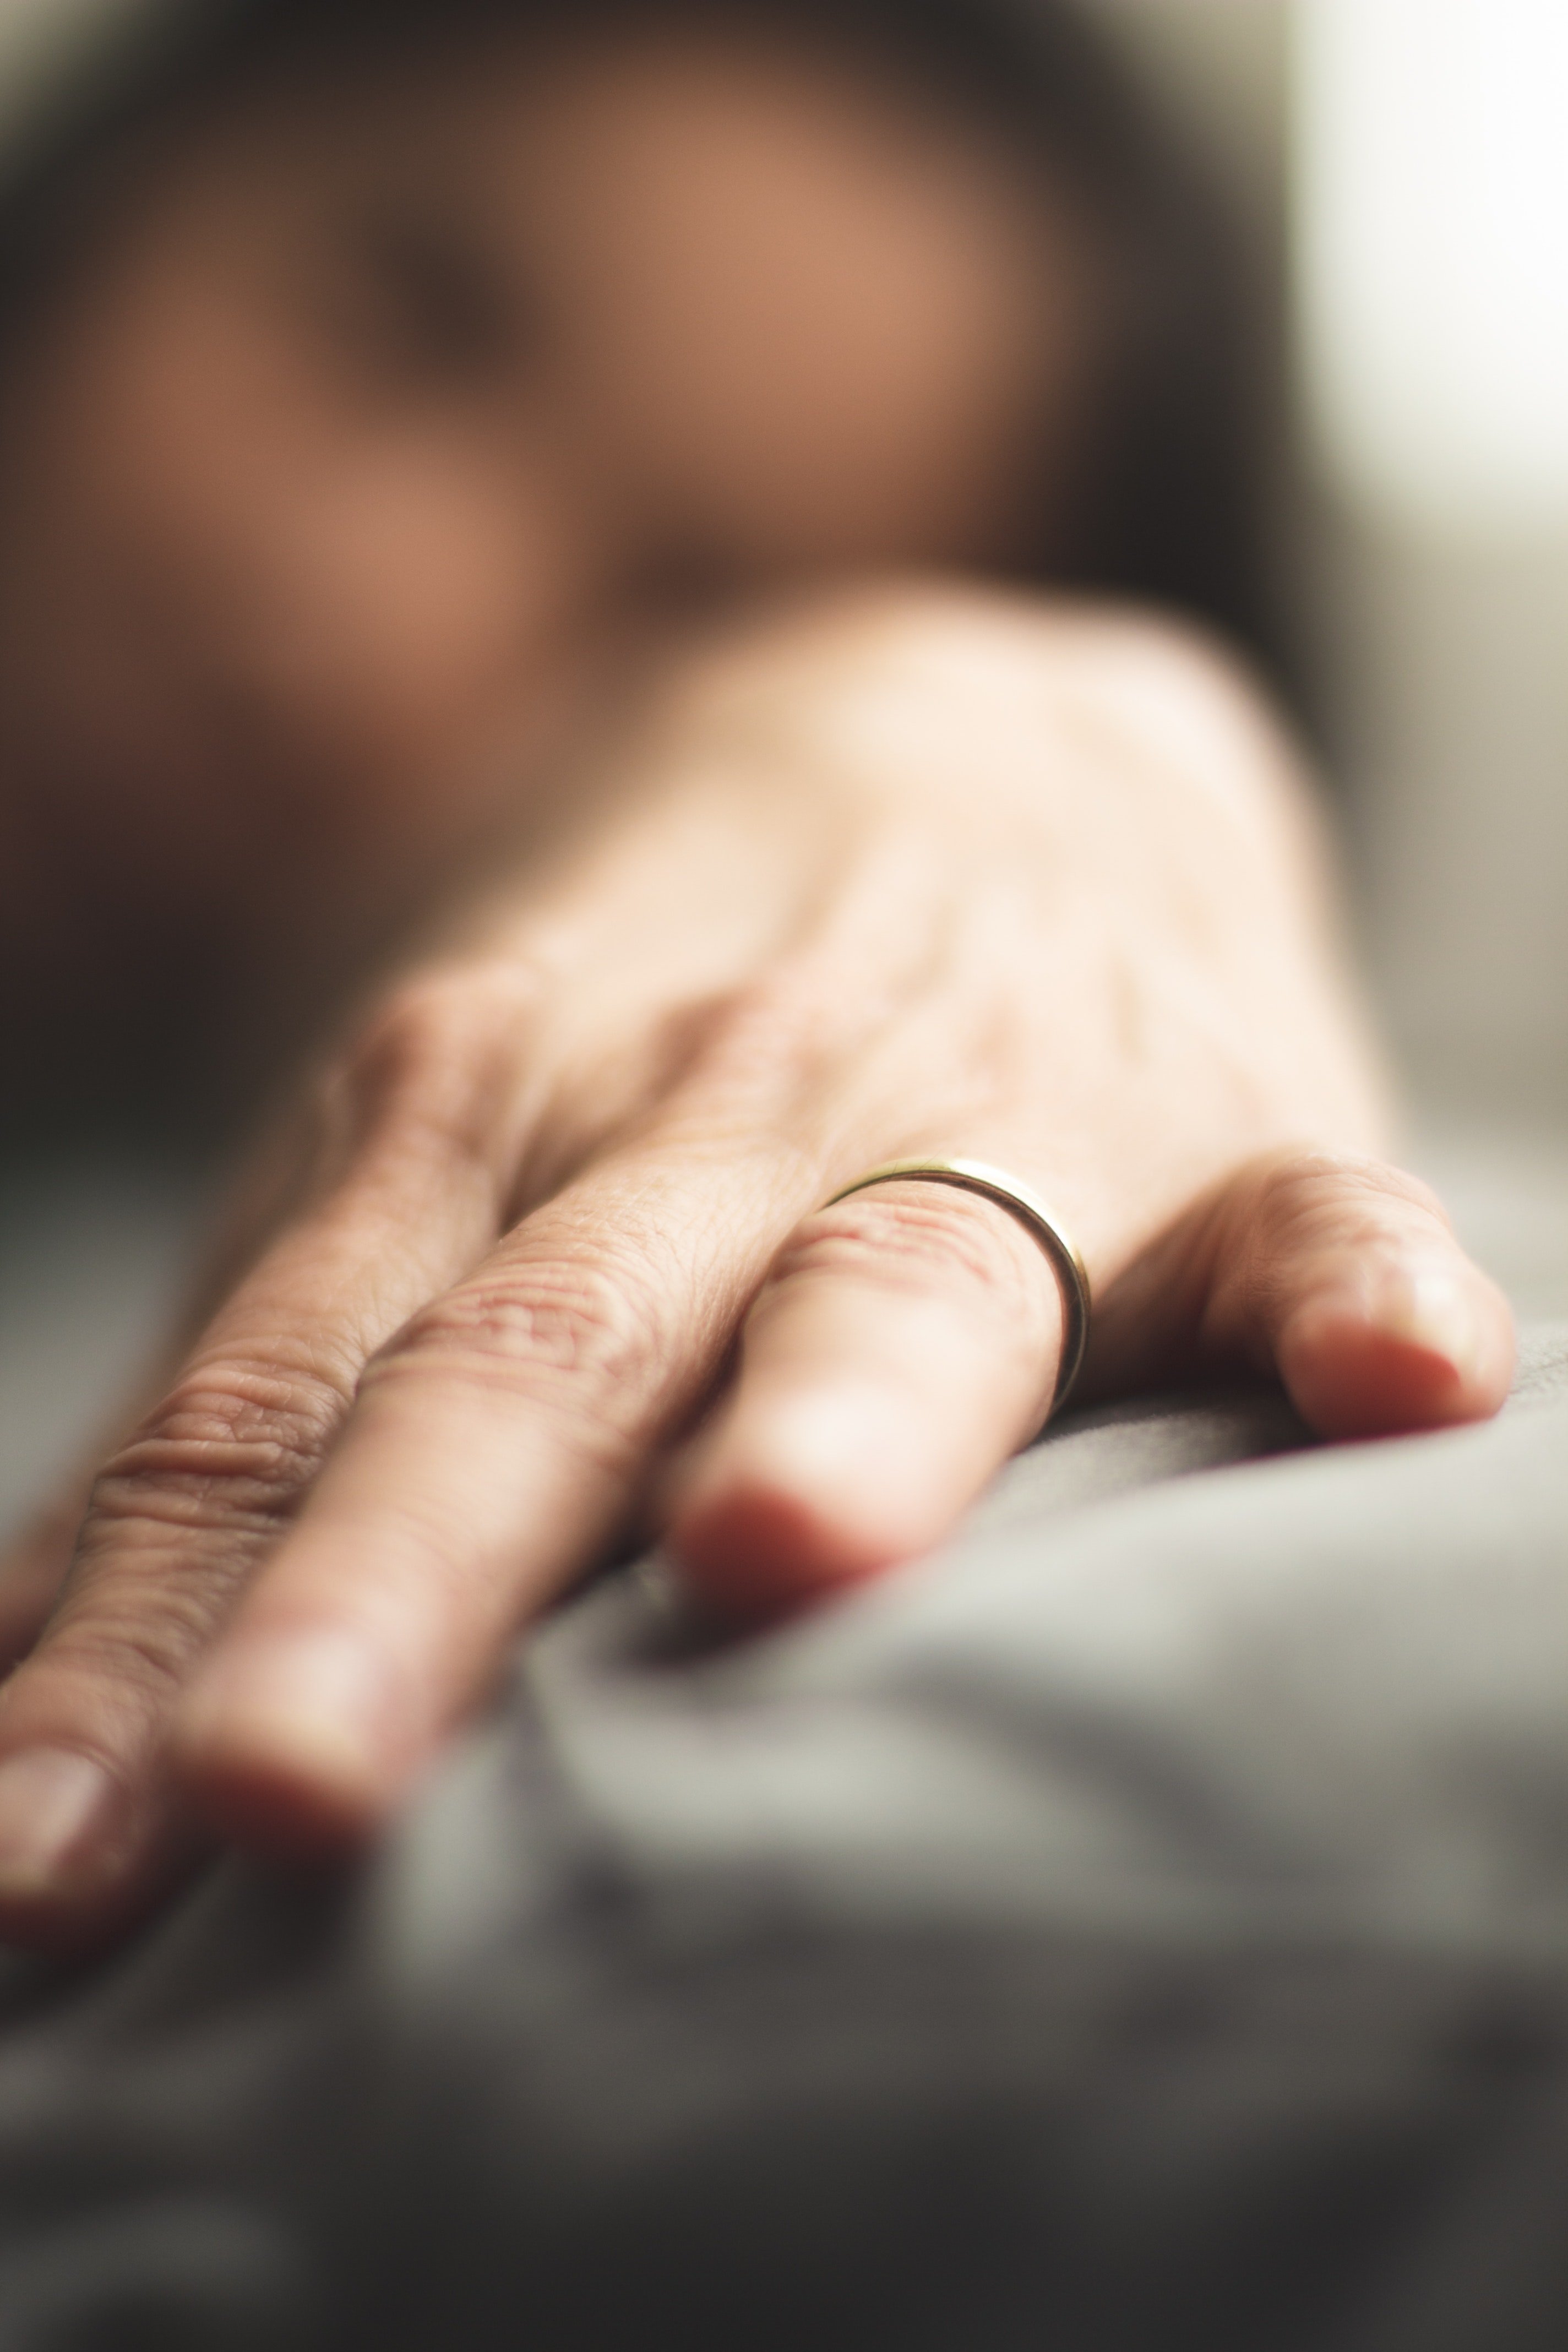 A close up of a hand with a wedding ring | Source: Pexels